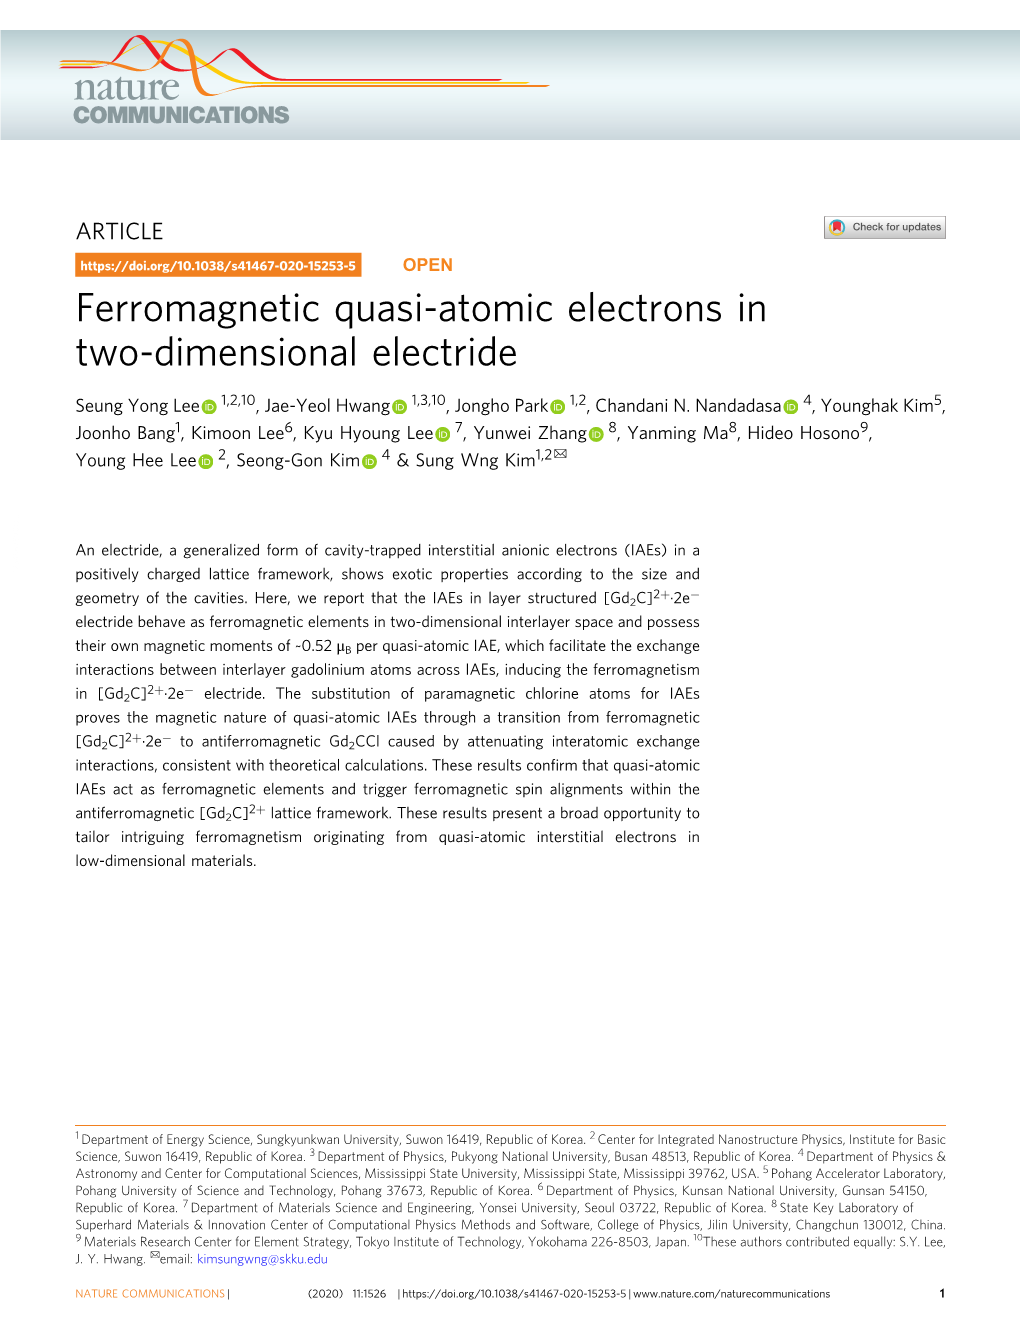 Ferromagnetic Quasi-Atomic Electrons in Two-Dimensional Electride